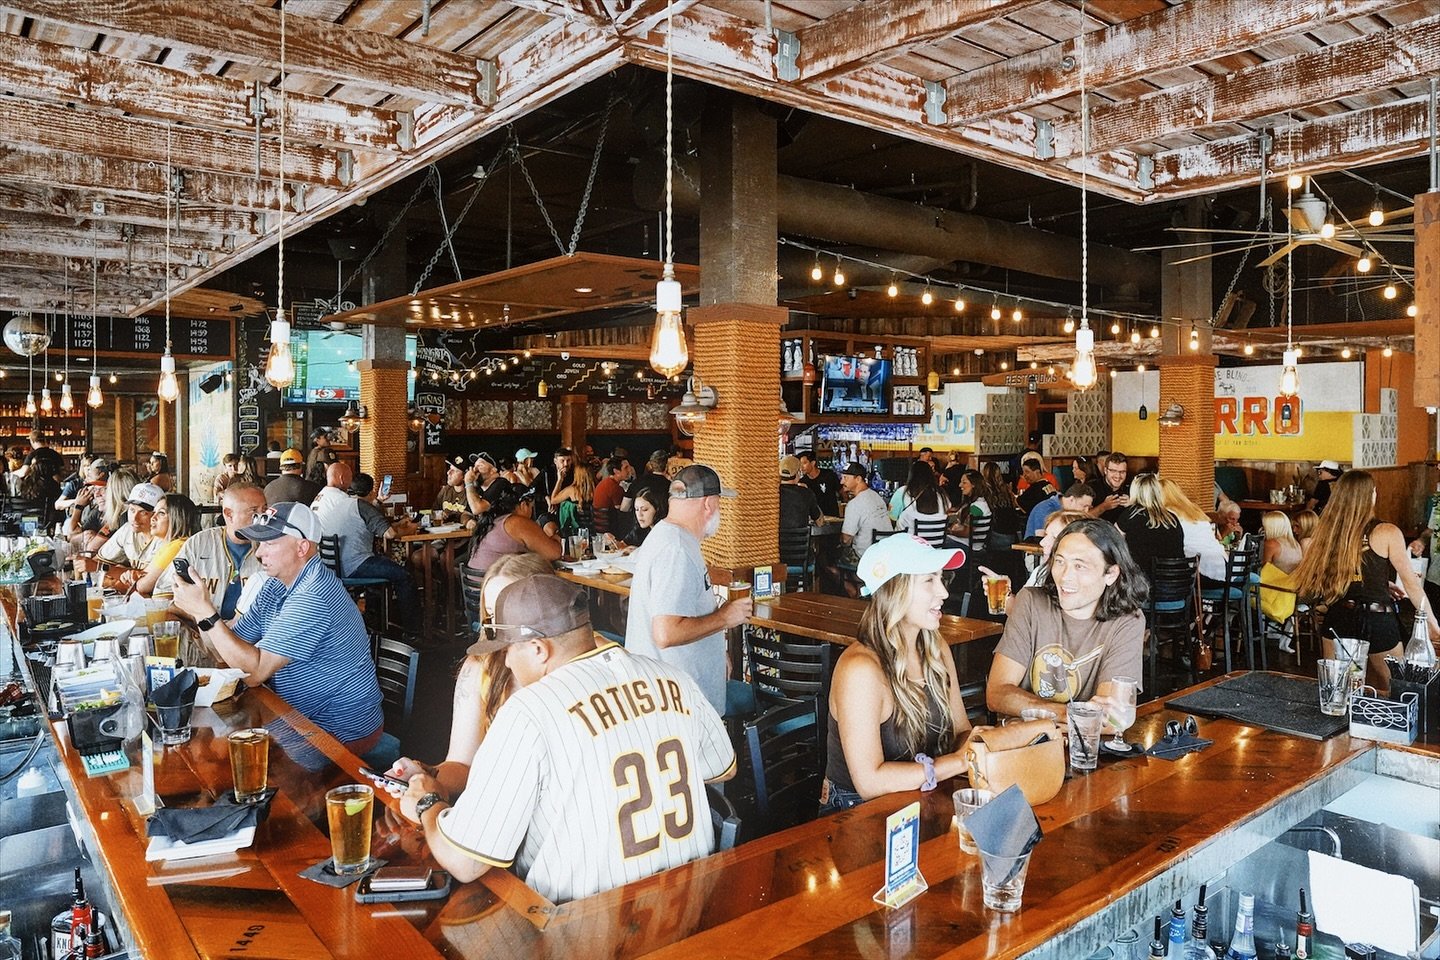 The PADRES are home! 🙌🏼 Get your tequila shots in before heading to the ballpark!